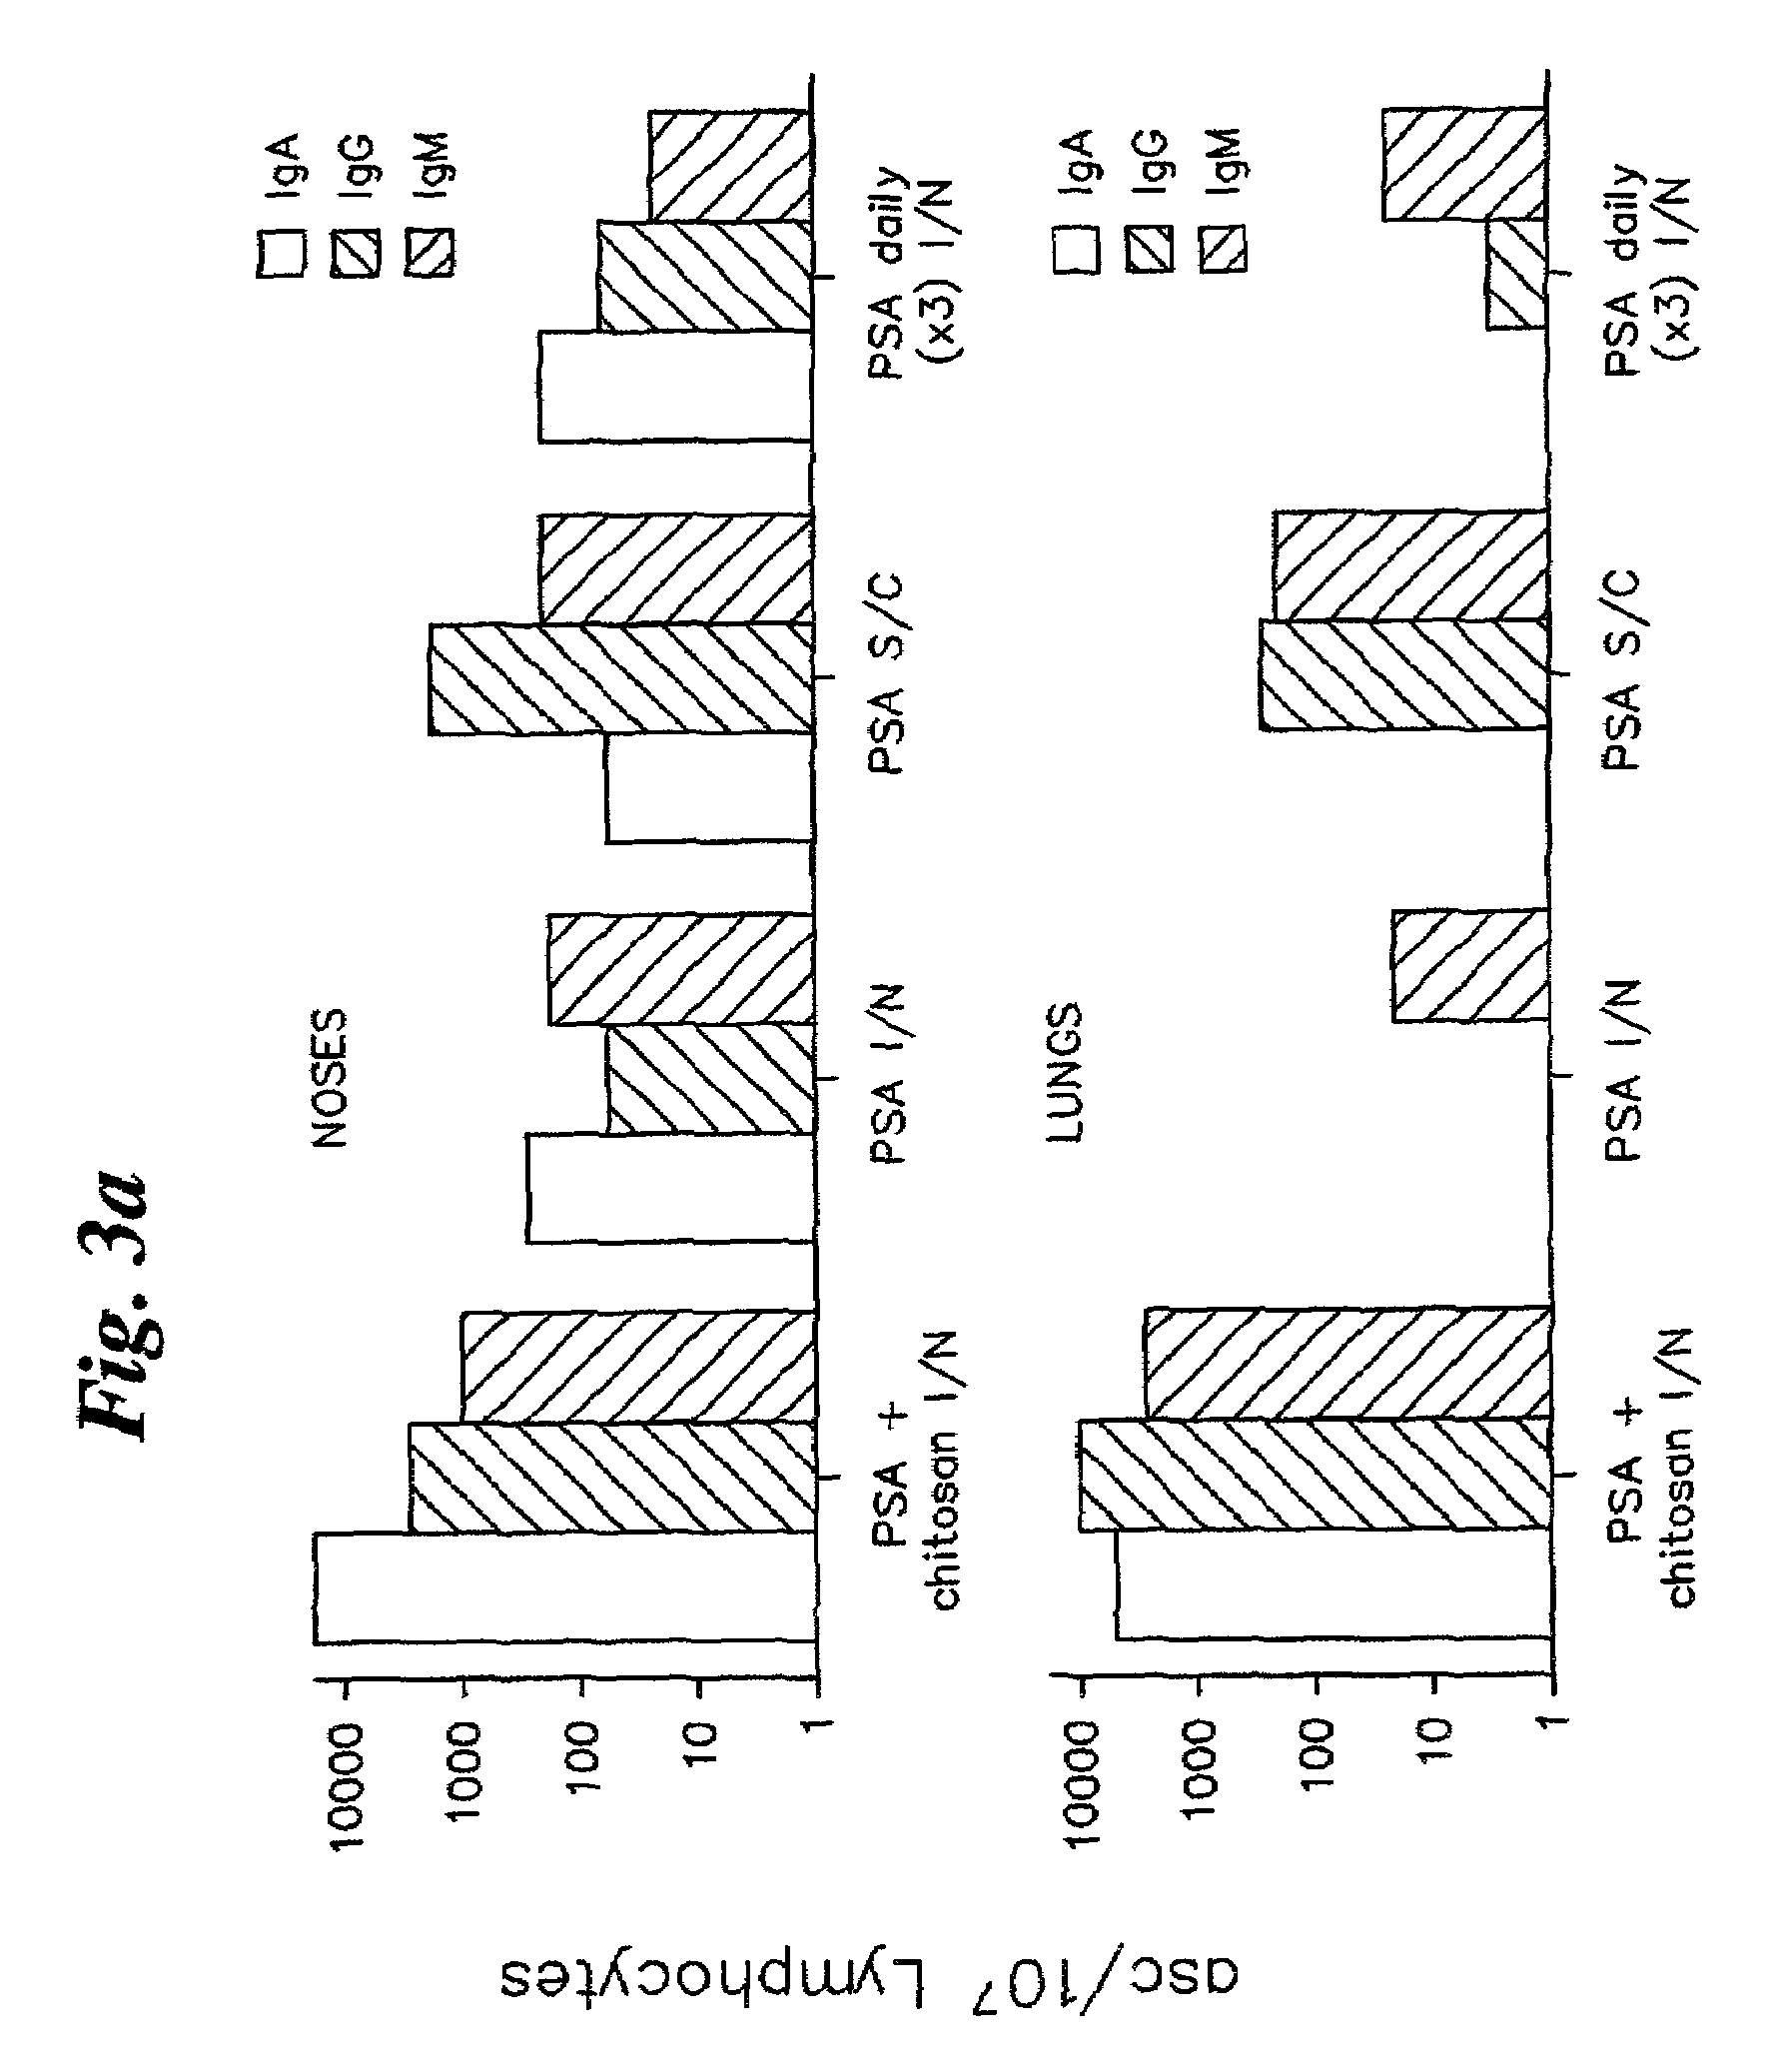 Vaccine compositions including chitosan for intranasal administration and use thereof